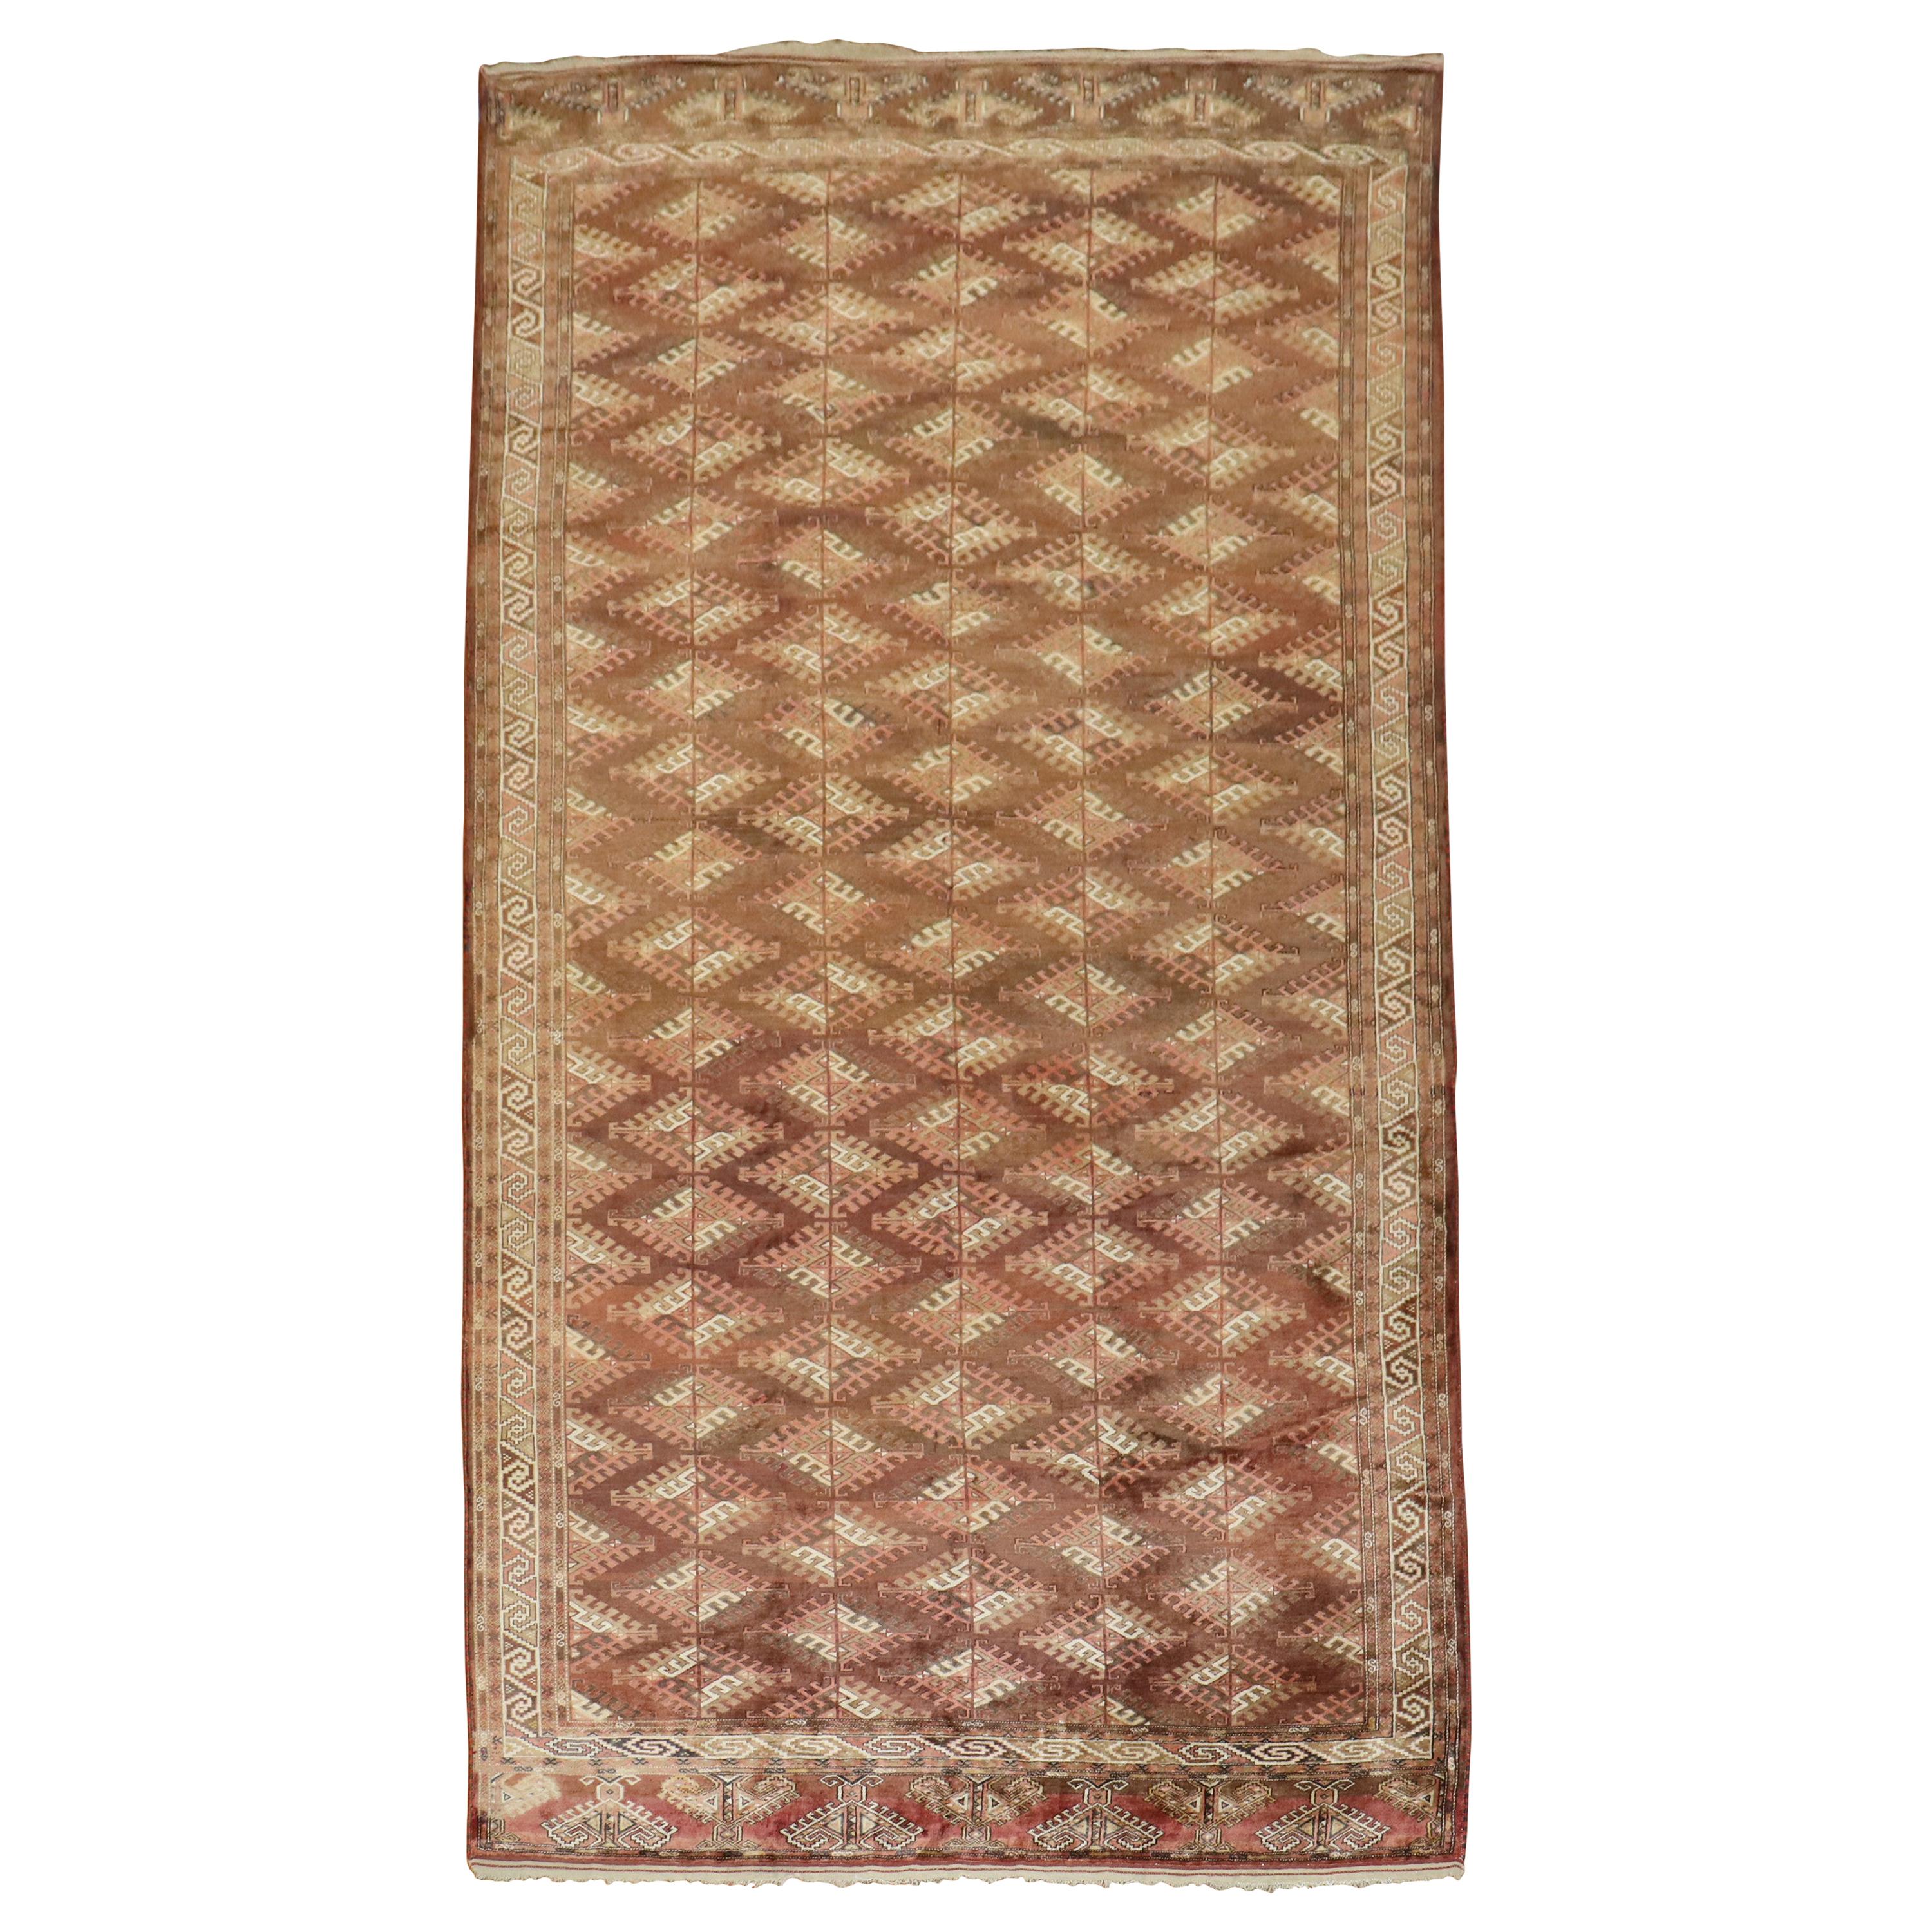 Rare room size Turkeman rug from the mid-20th century with a rustic feel in various shades in rust and brown.

Measures: 7' x 12'6